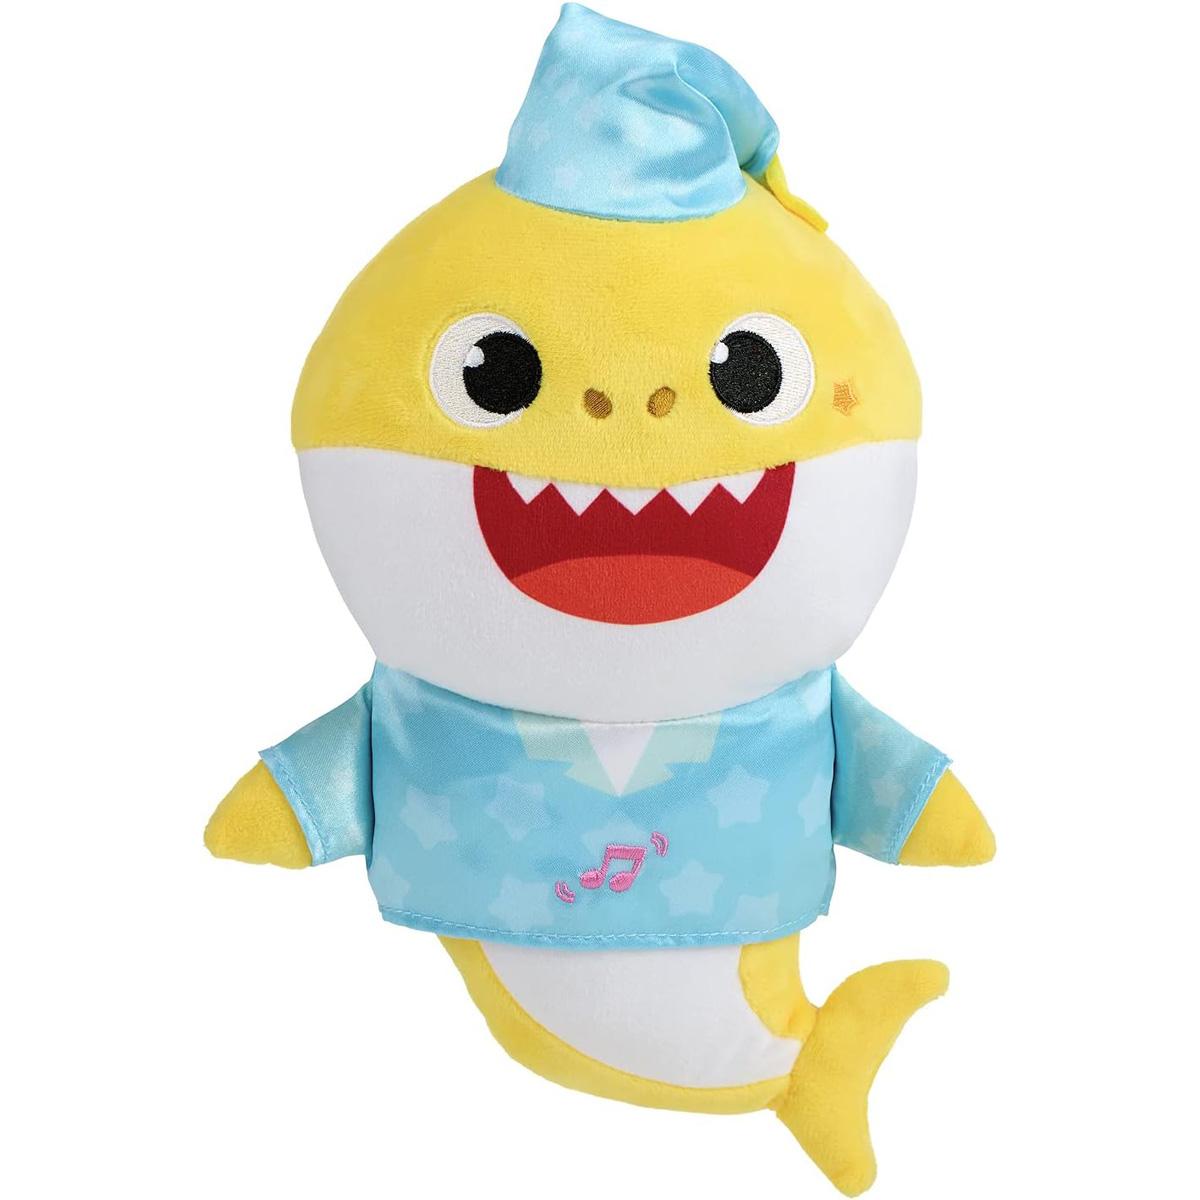 Baby Shark Pingfong Sleep Soother Baby Toy for $3.99